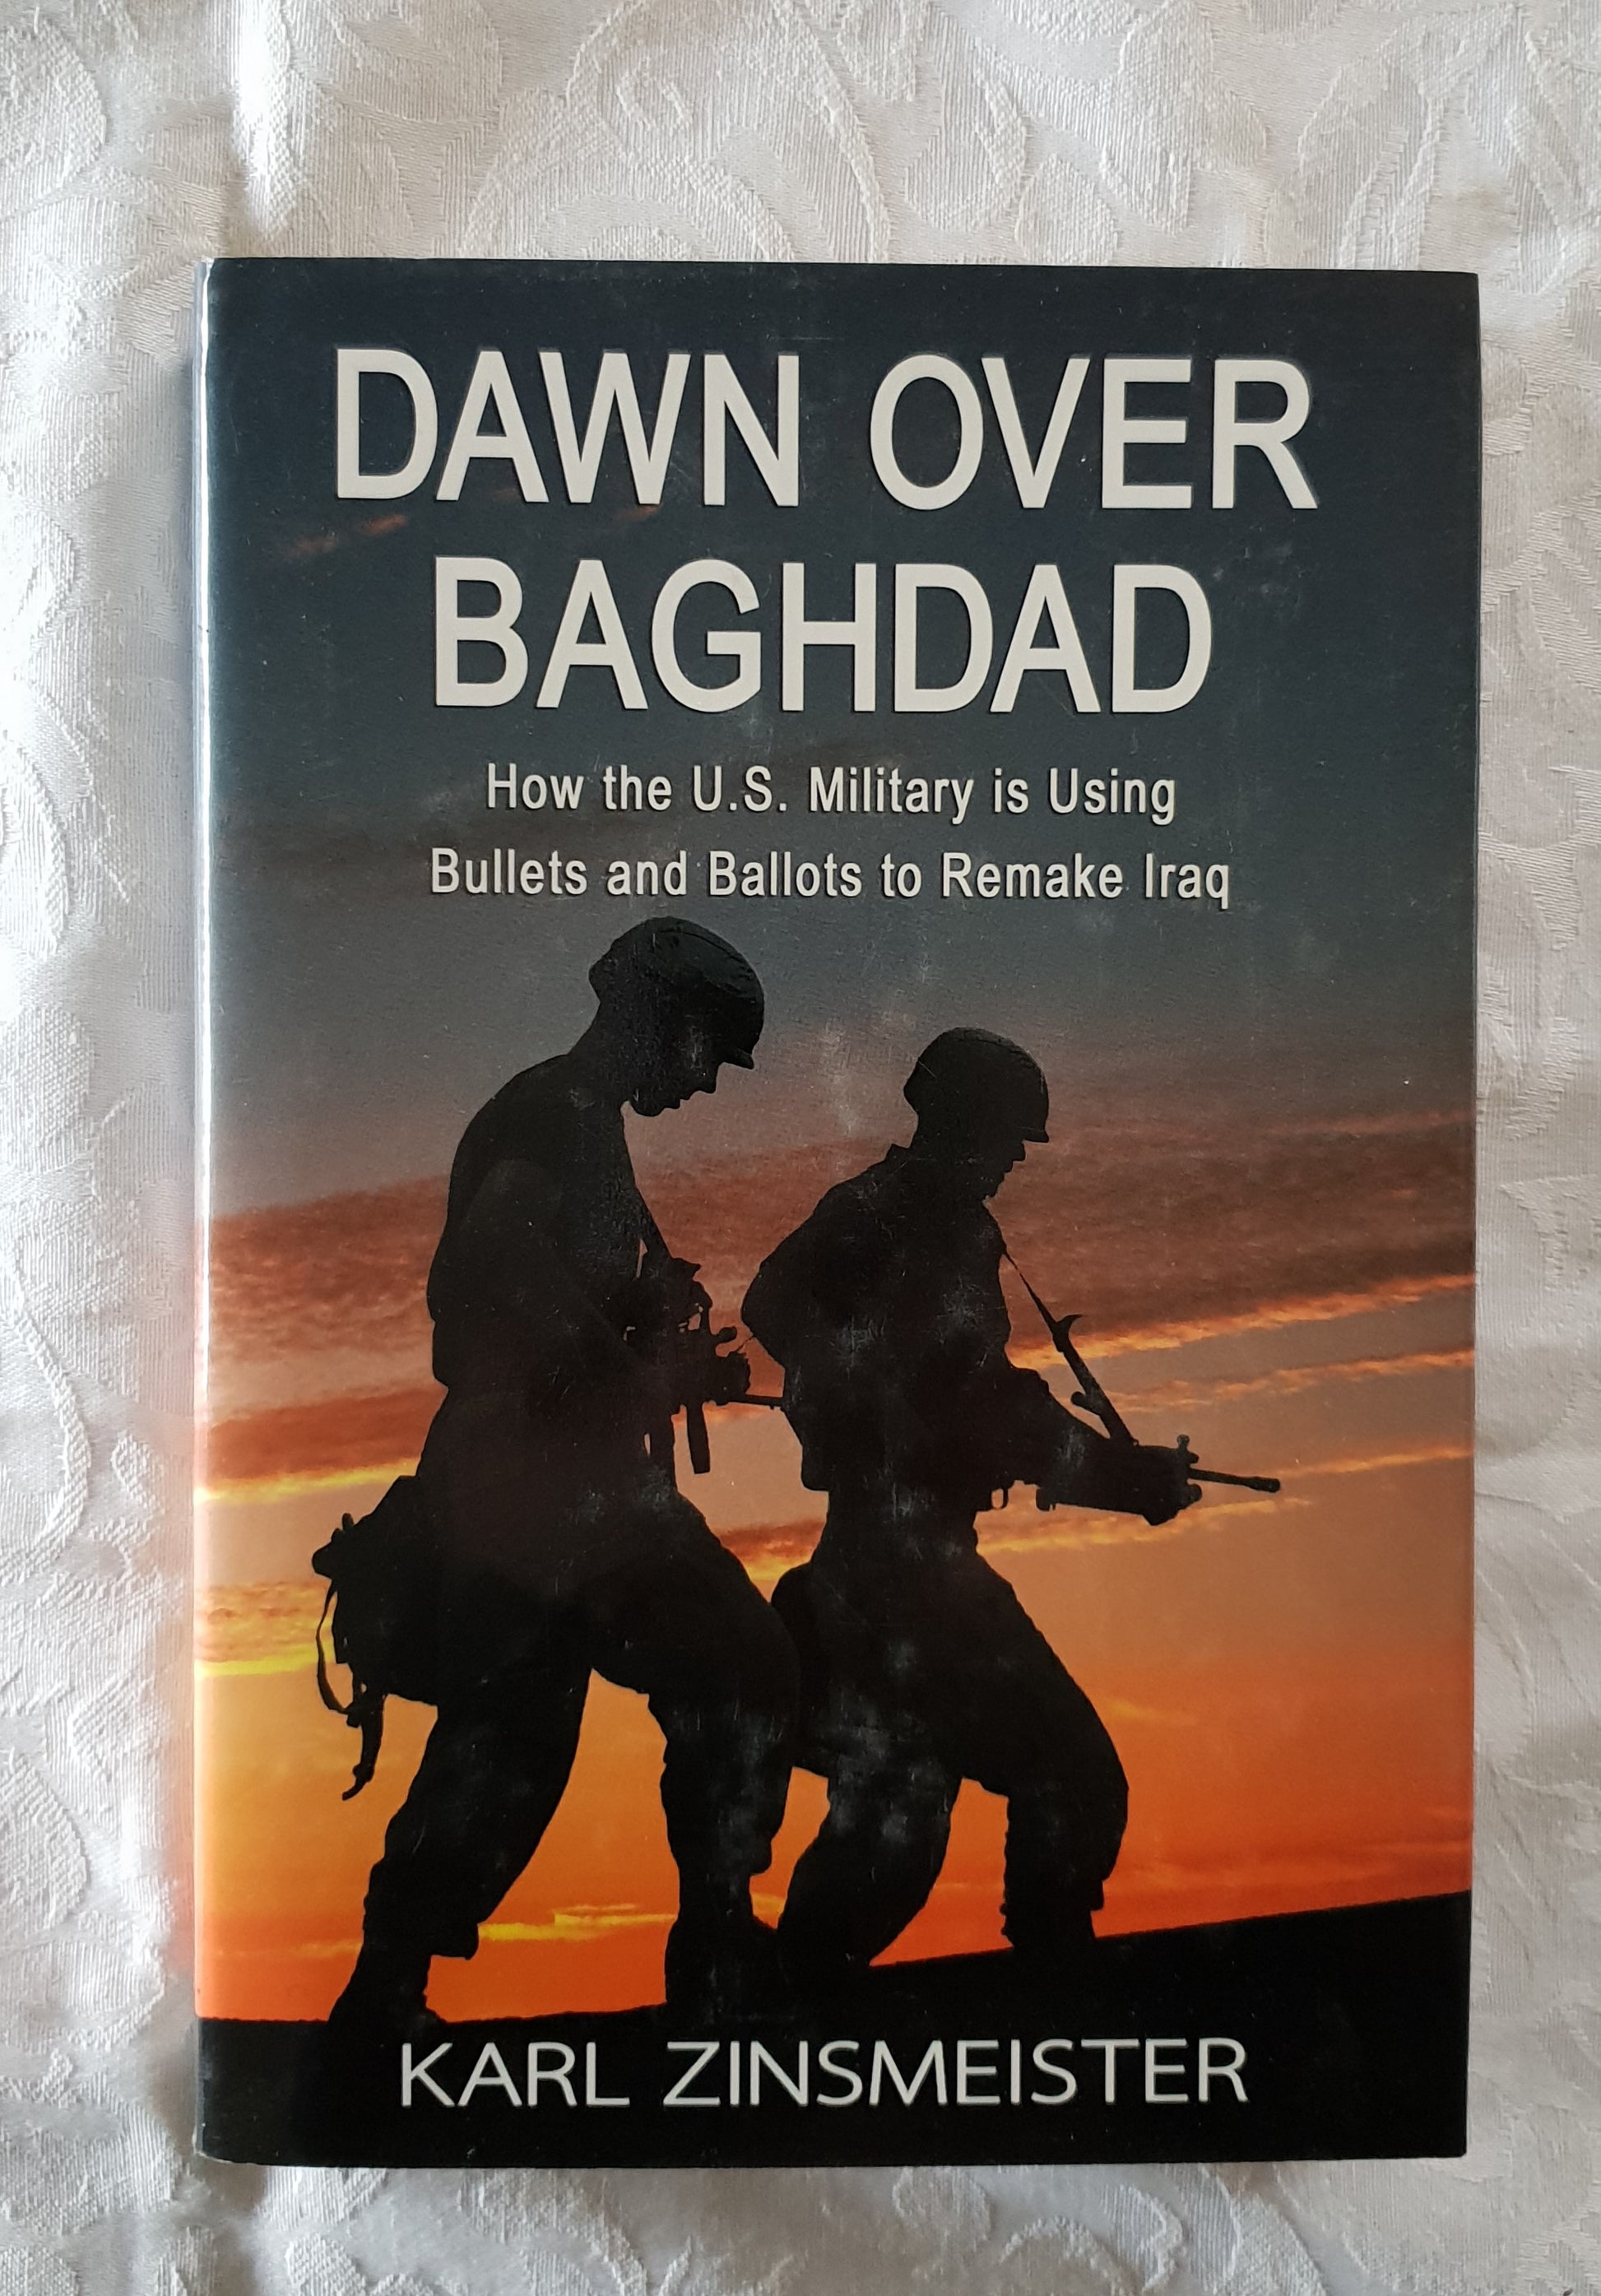 Dawn Over Baghdad  How the U.S. Military is Using Bullets and Ballots to Remake Iraq  by Karl Zinsmeister